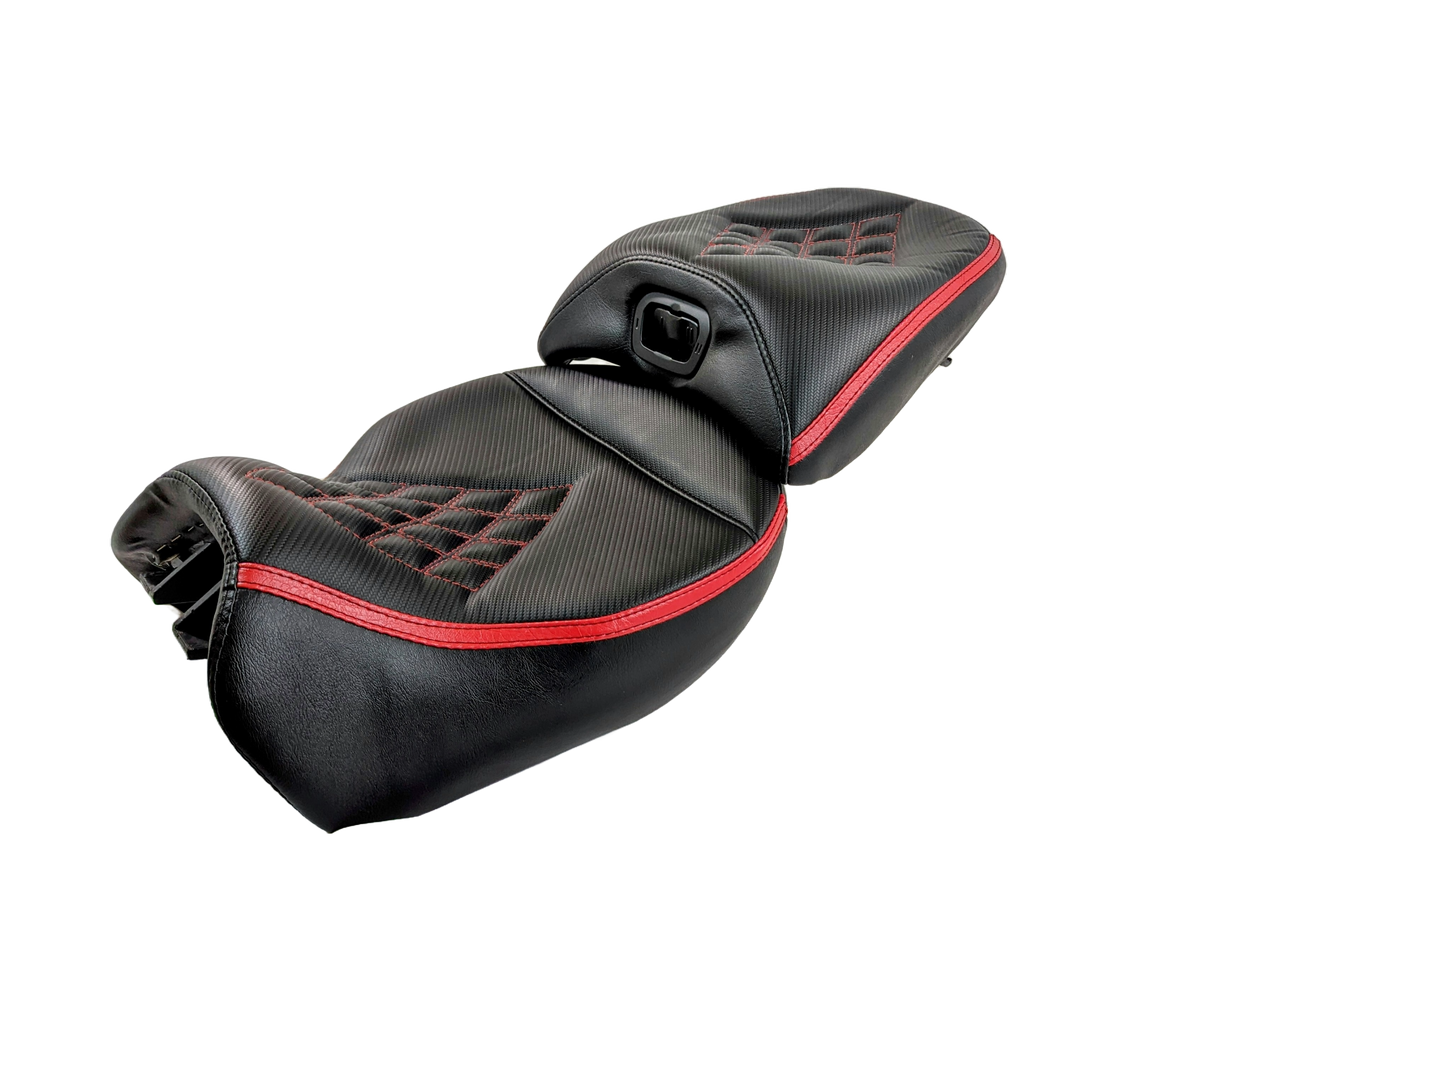 Ducati Multistrada V4 seat in black carbon with red diamond inlay